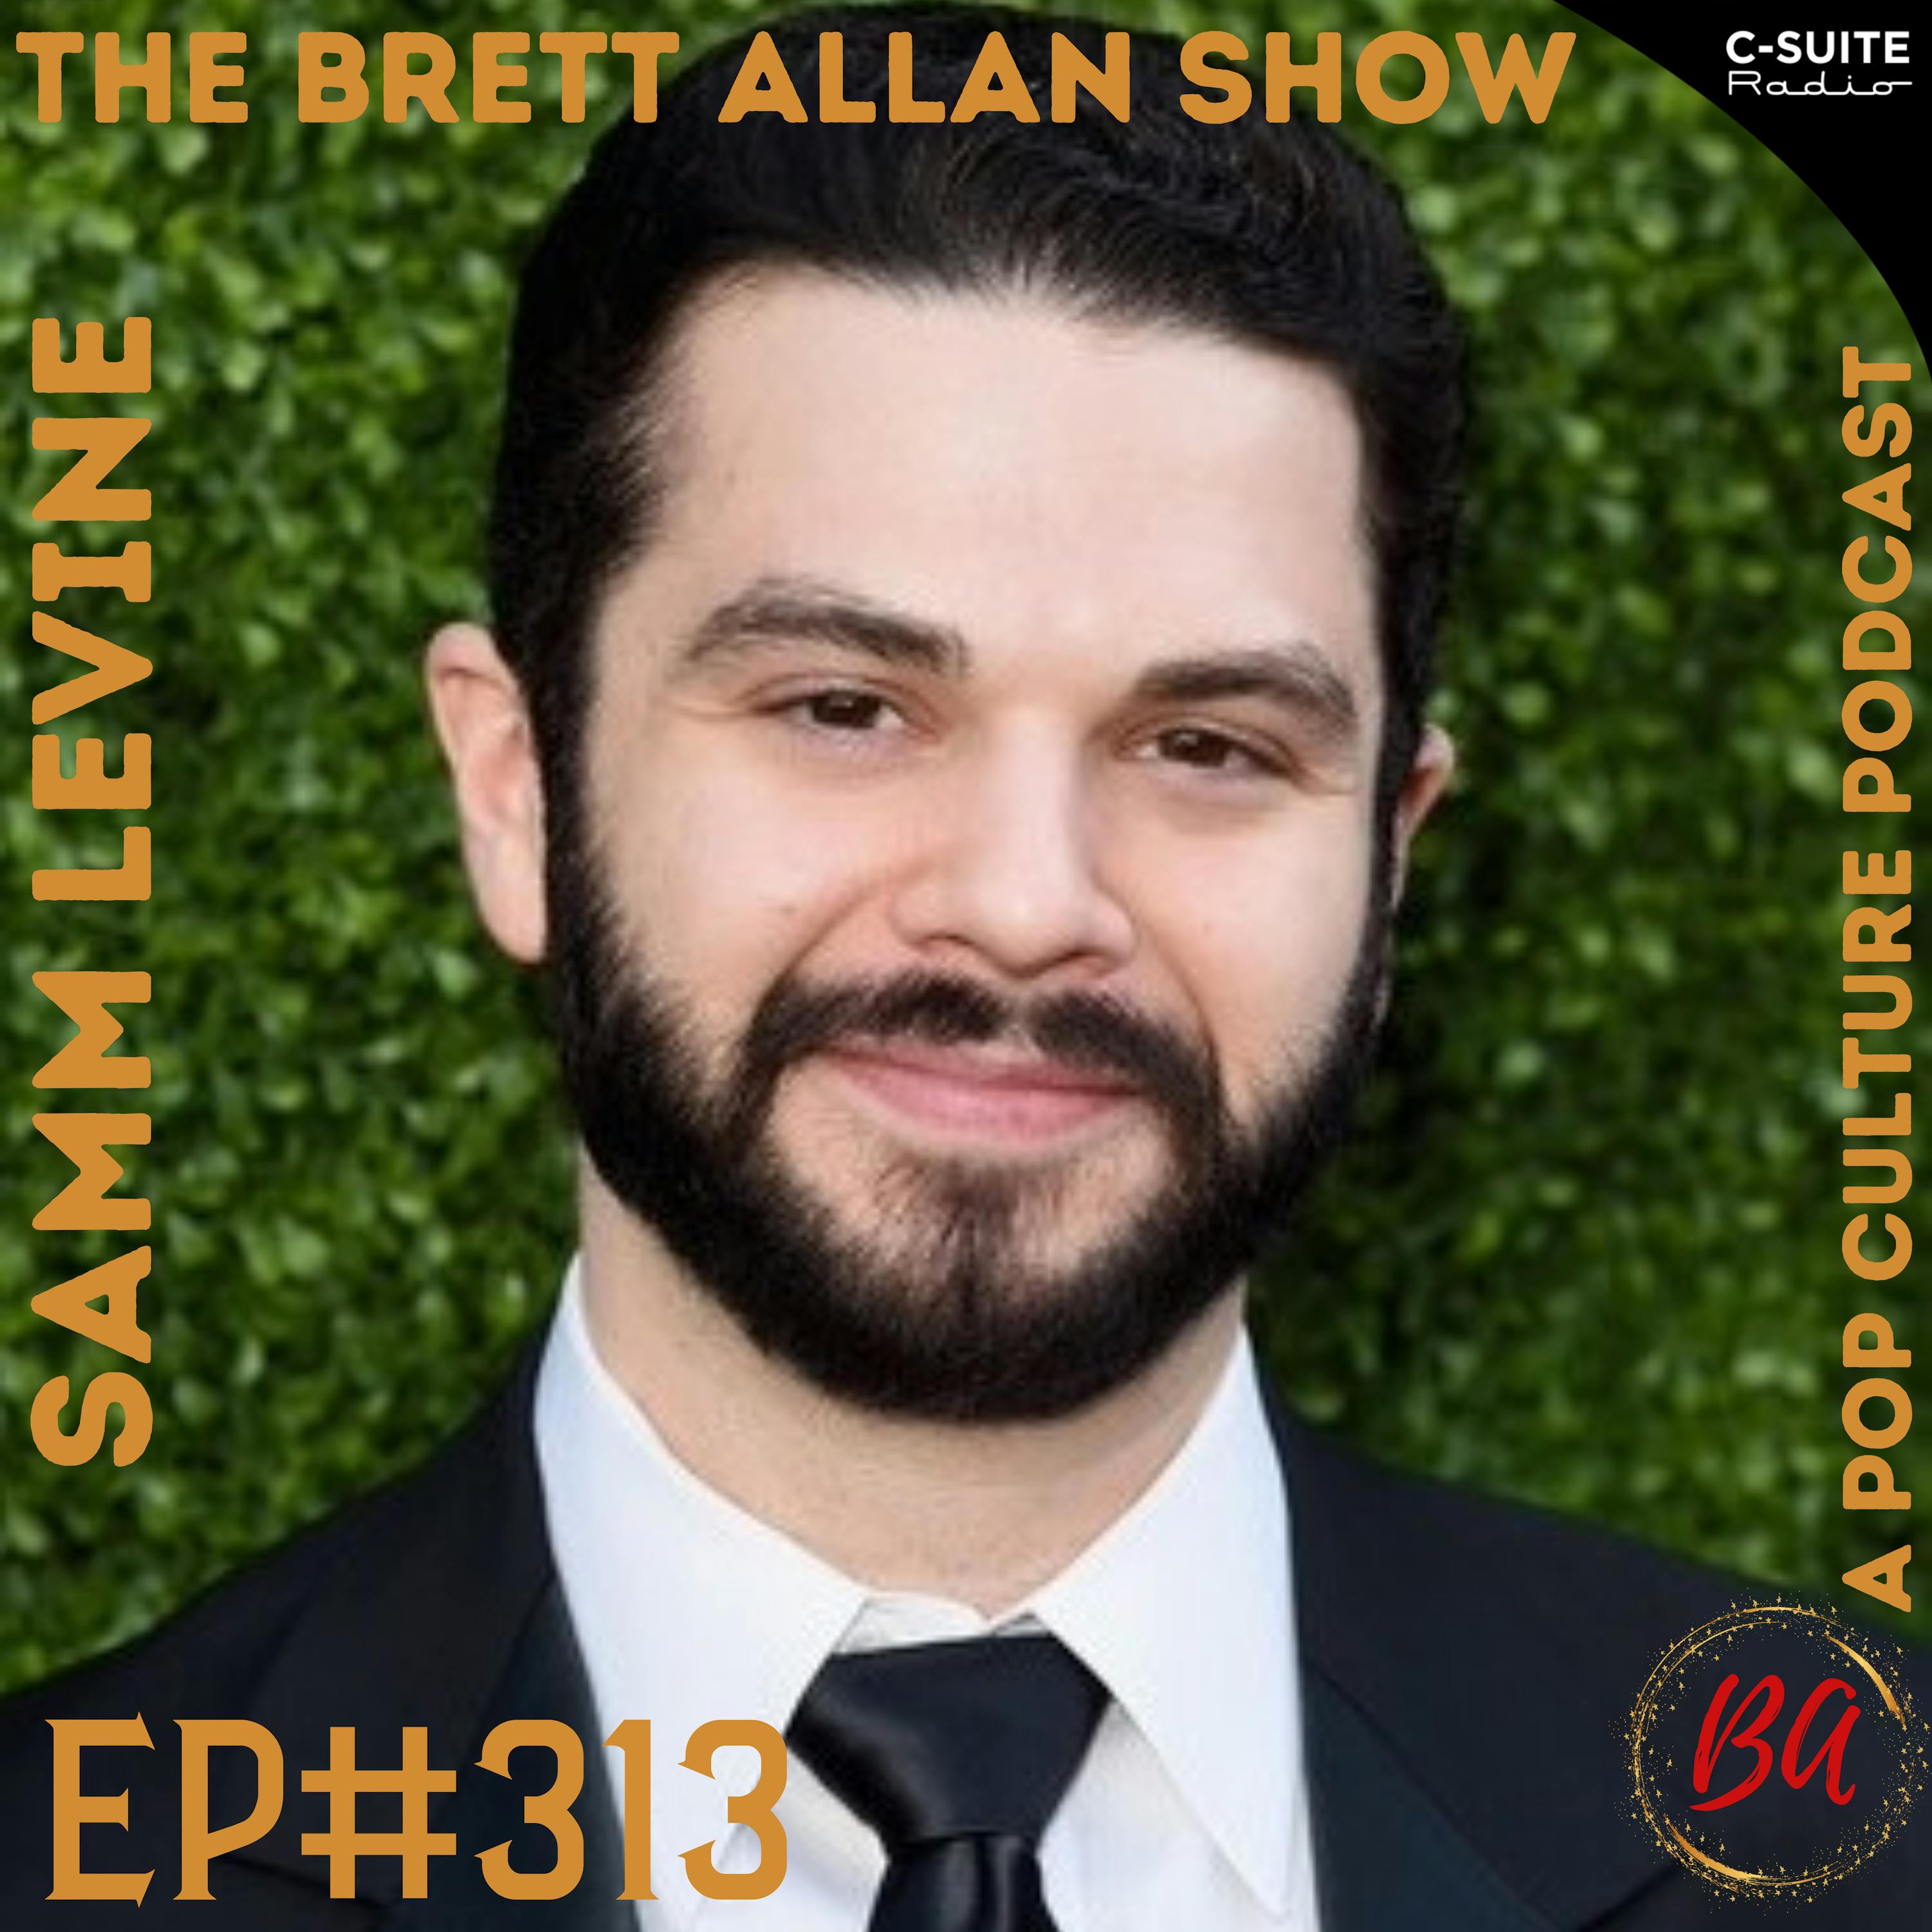 Actor Samm Levine Talks Freaks and Geeks. Inglorious Bastards and His Iconic Career | This Is How I Define Success Image